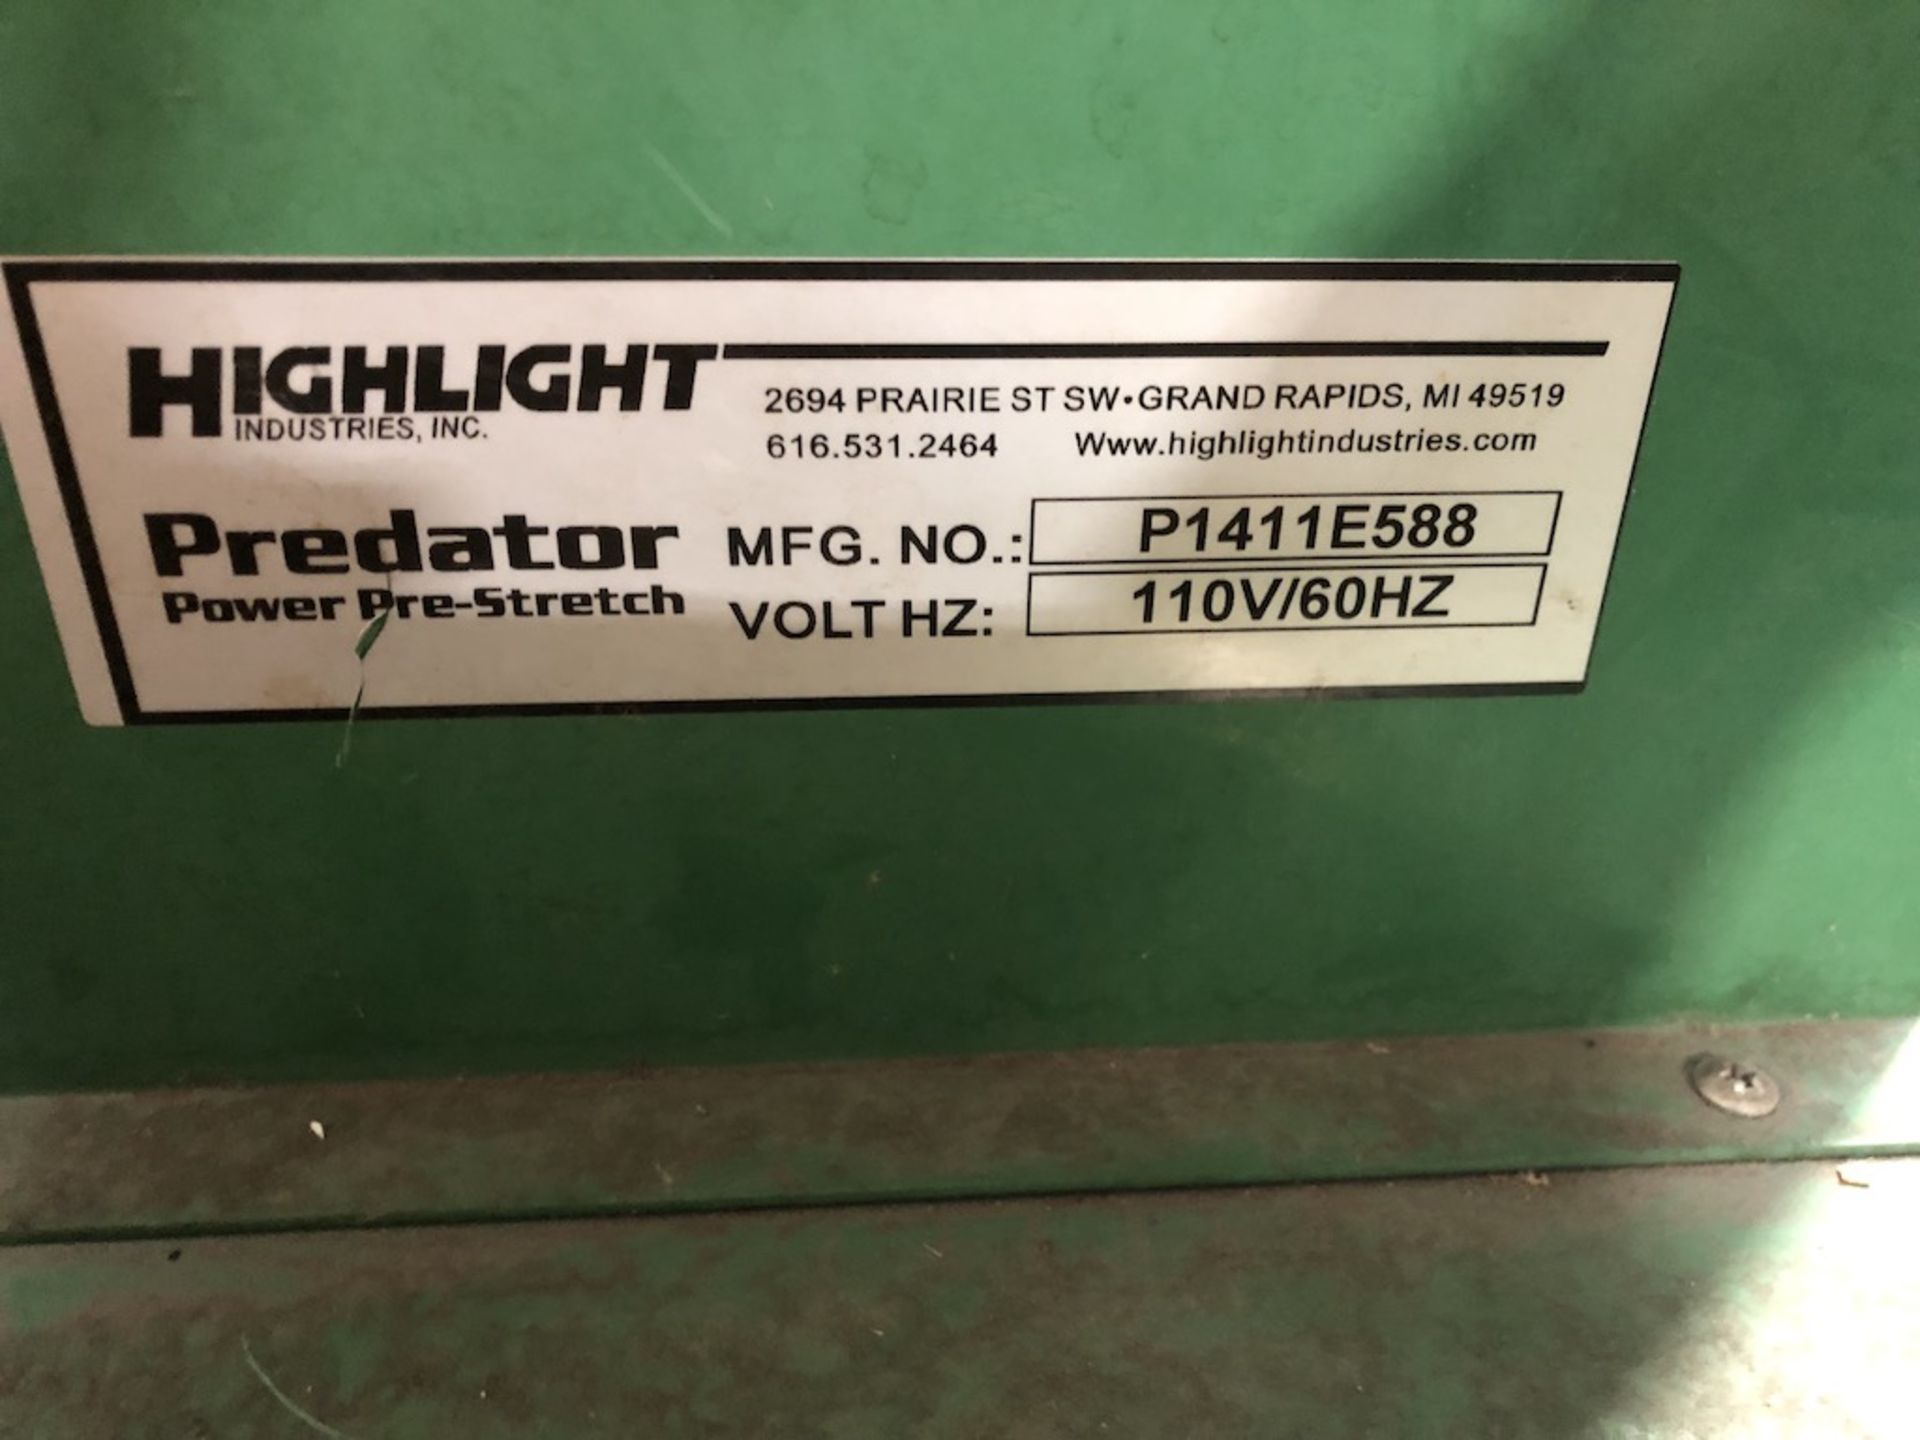 HIGHLIGHT INDUSTRIES INC. PREDATOR POWER PRE-STRETCH PALLET WRAPPER SEMI-AUTOMATIC STRECH WRAP - Image 5 of 6